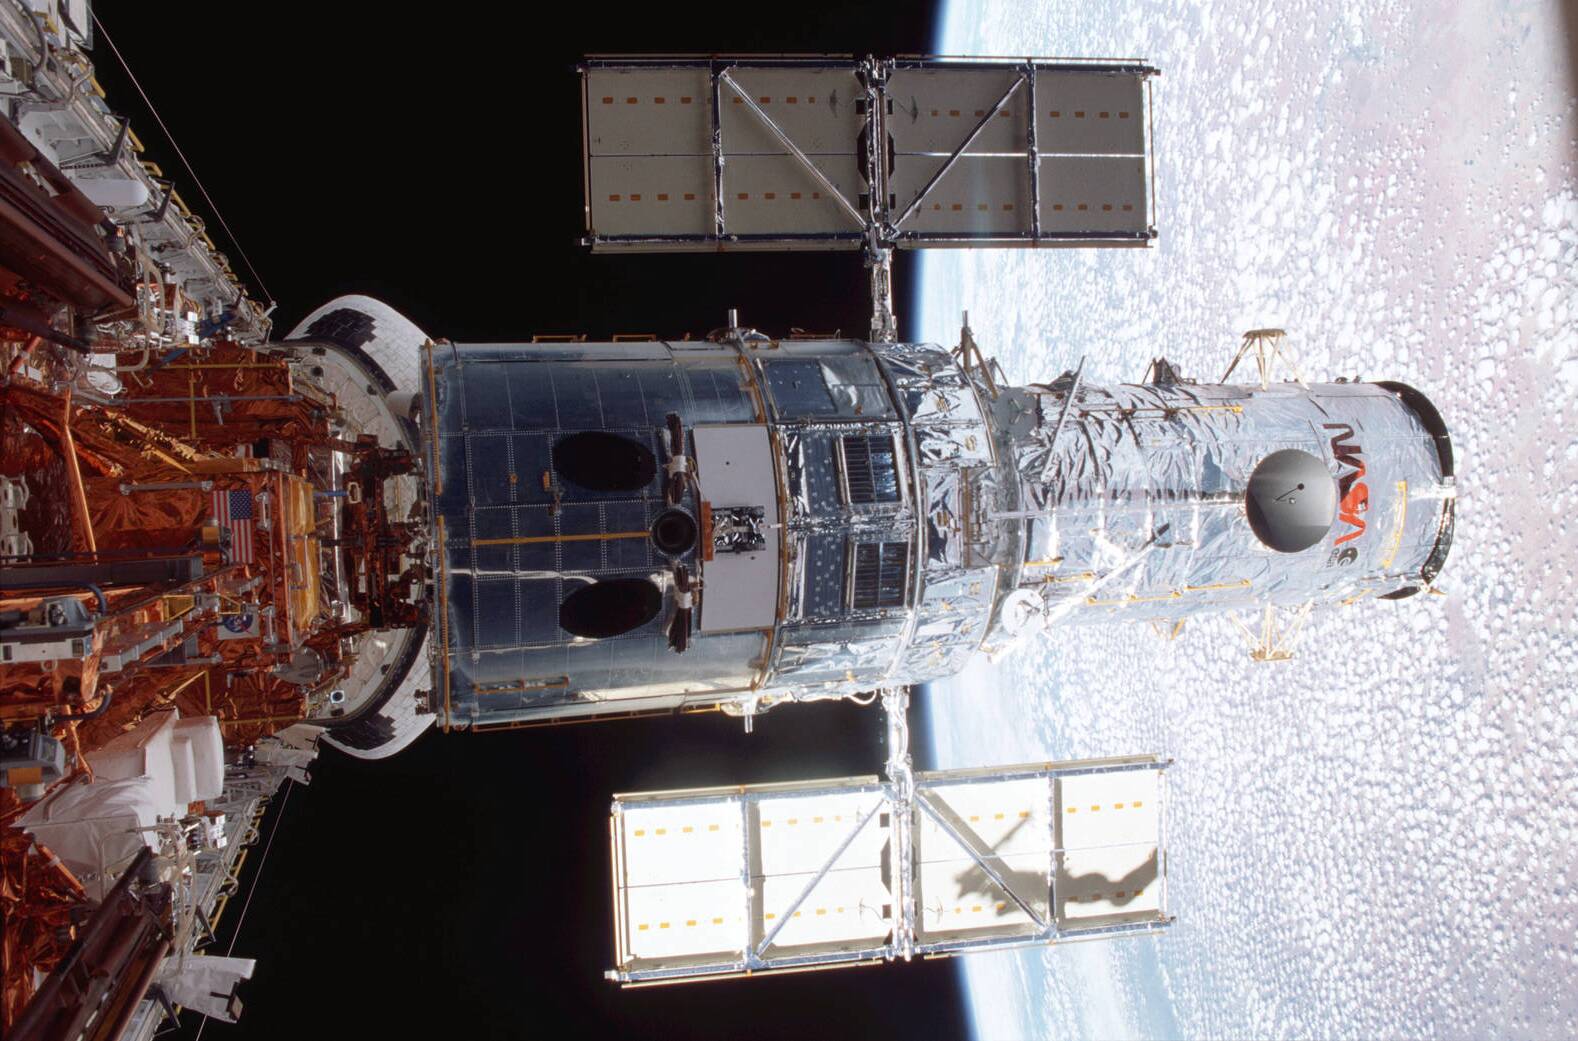 The Hubble Space Telescope as it flies through space.